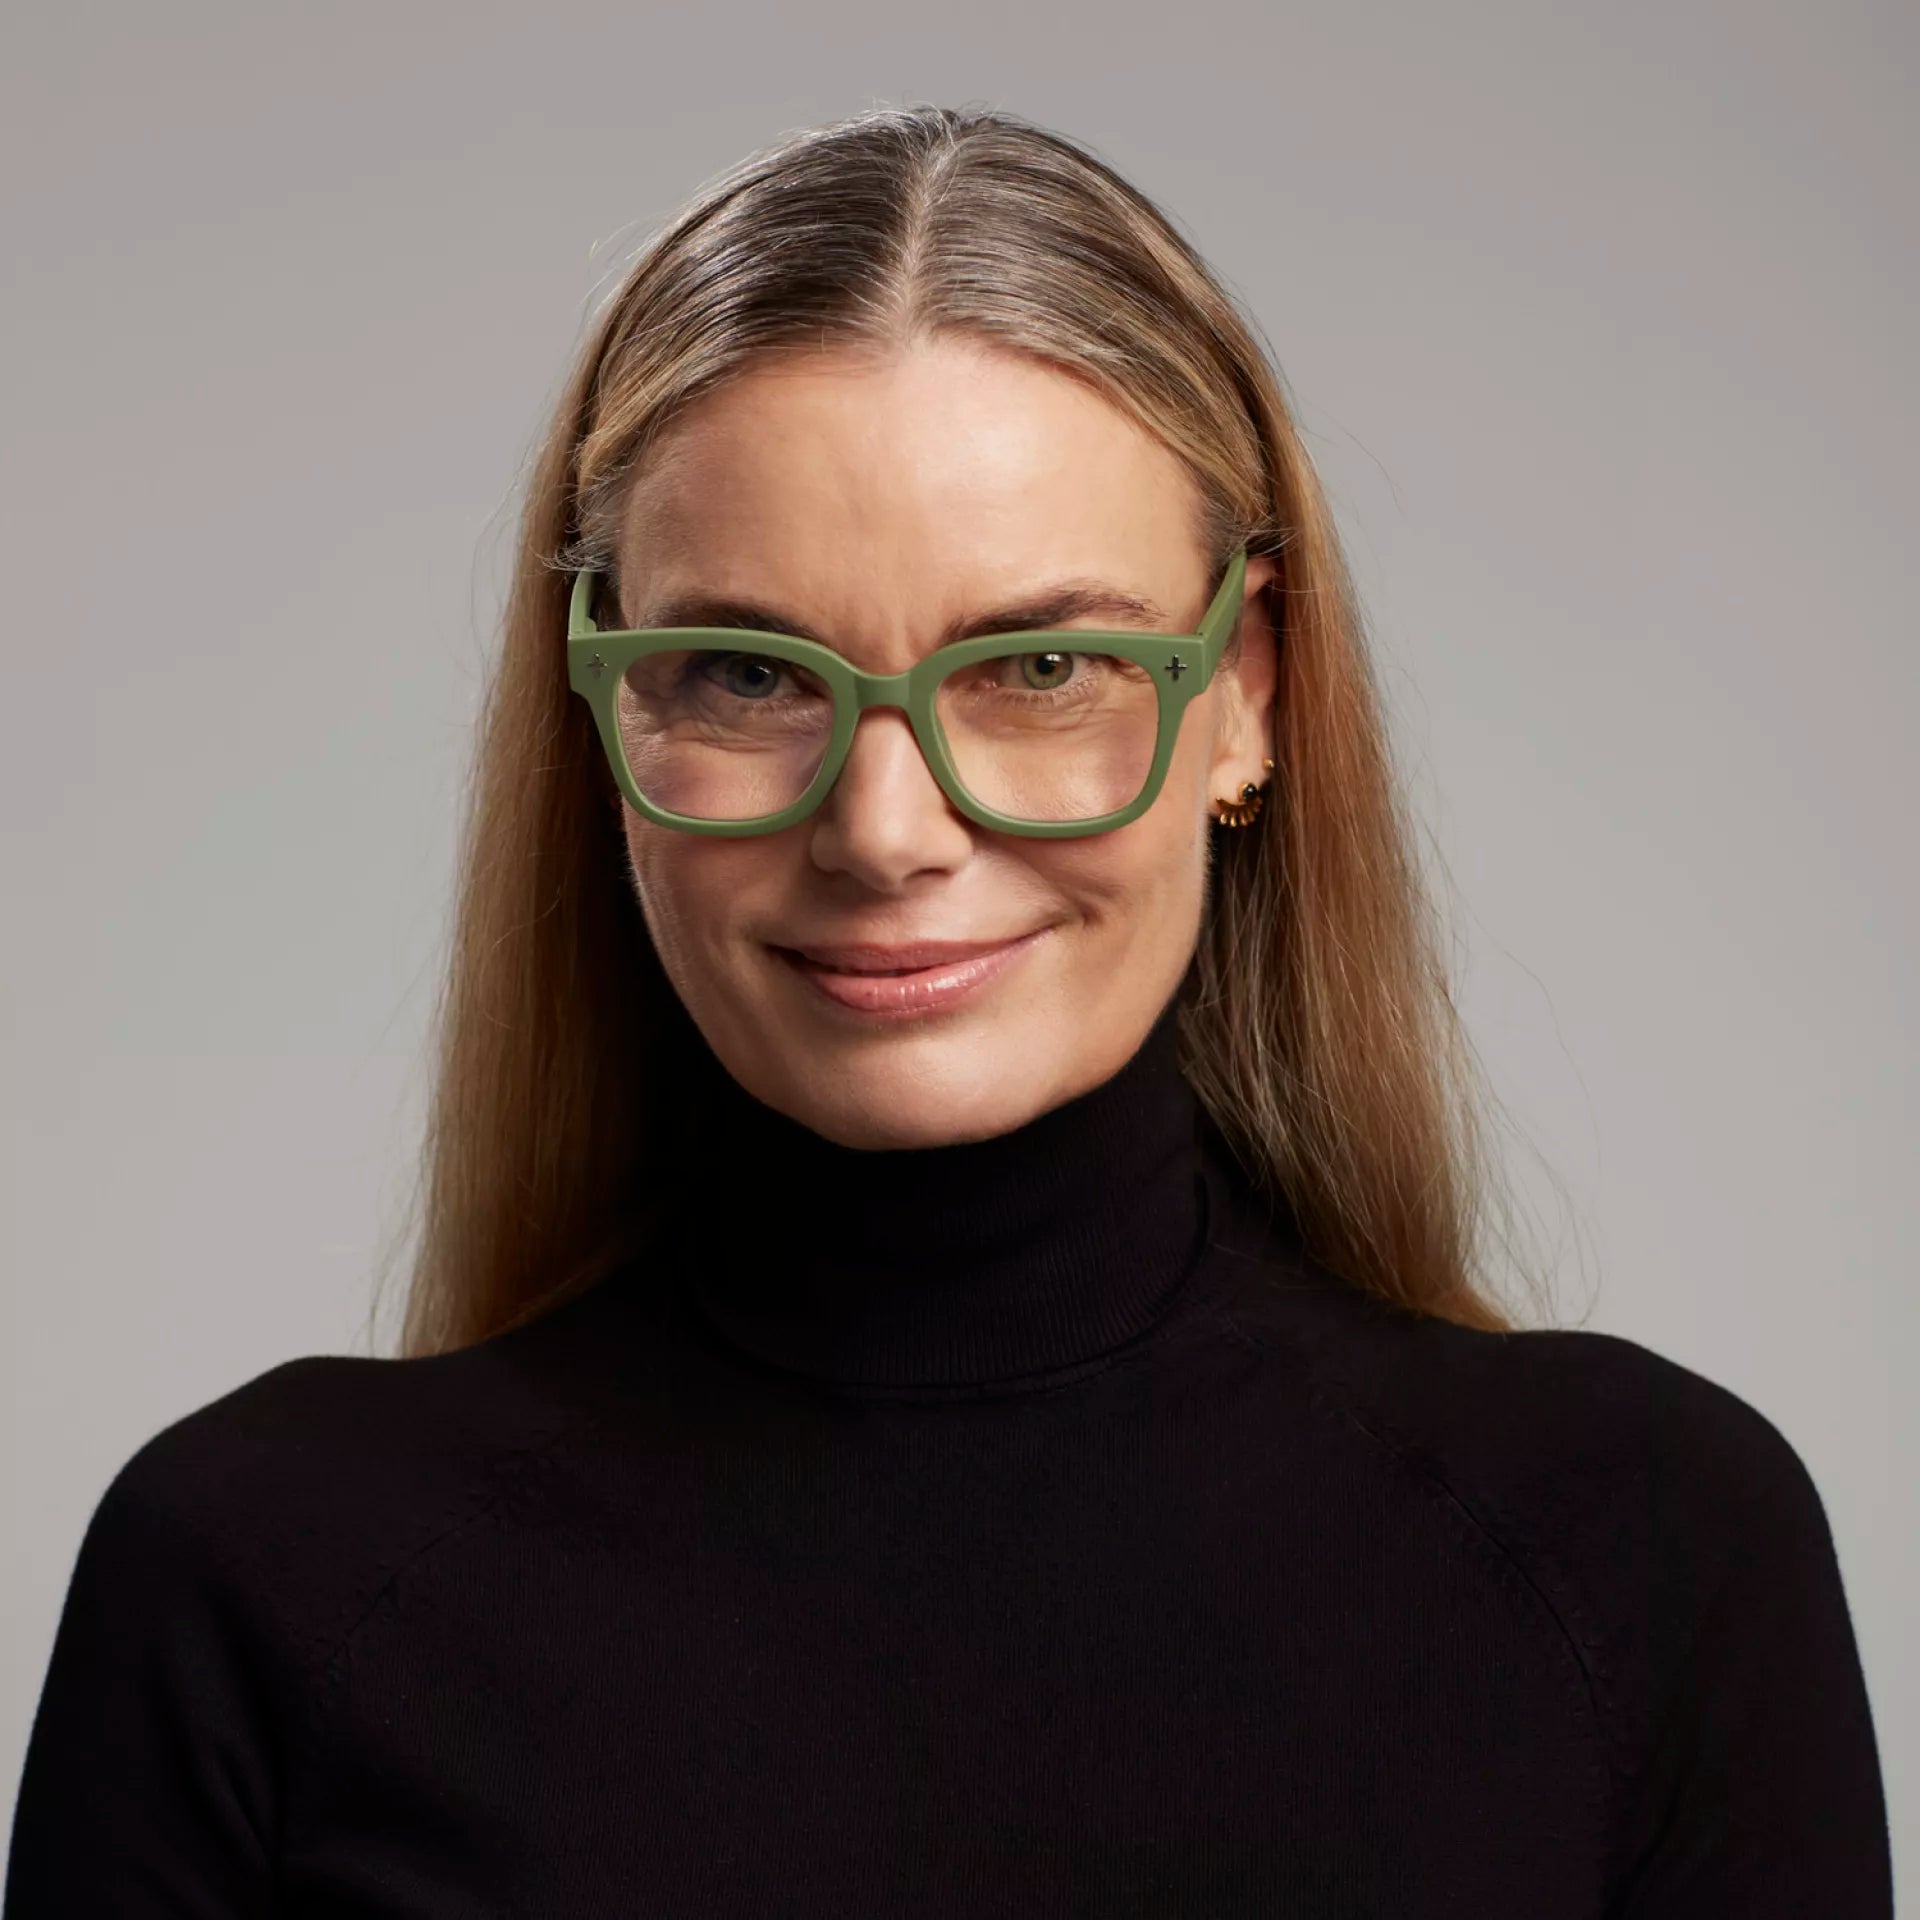 Fabulous Gifts Okkia Reading Glasses Nero Verde 1.50 by Weirs of Baggot Street